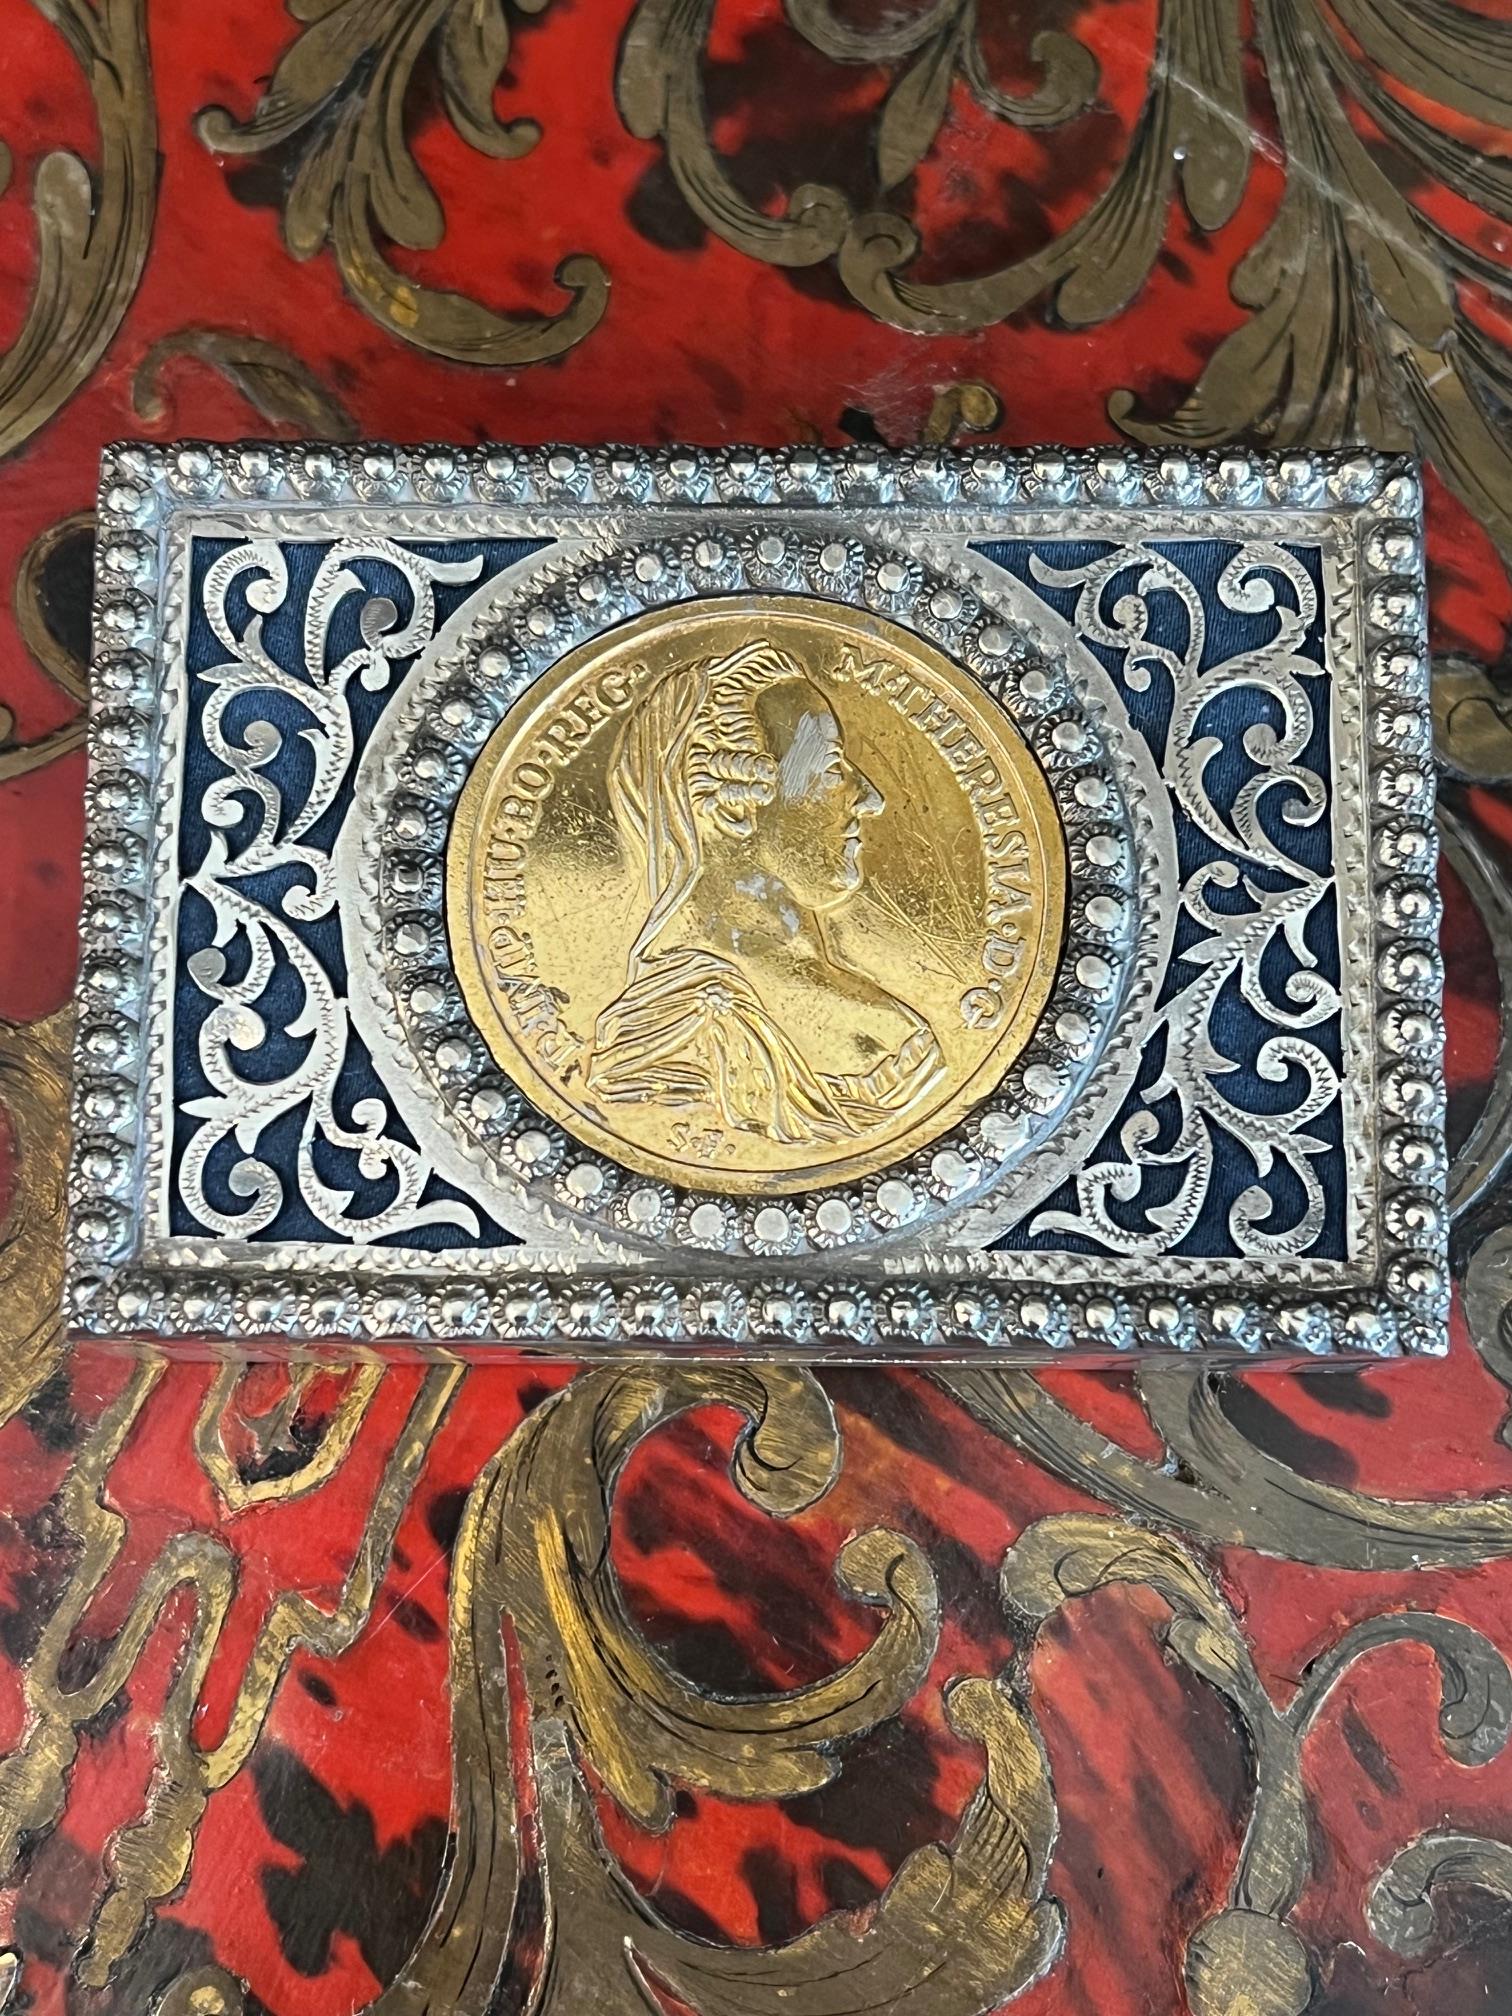 A RUSSIAN SILVER SNUFF BOX INLAID WITH A MARIA THERESA COIN - Image 4 of 6